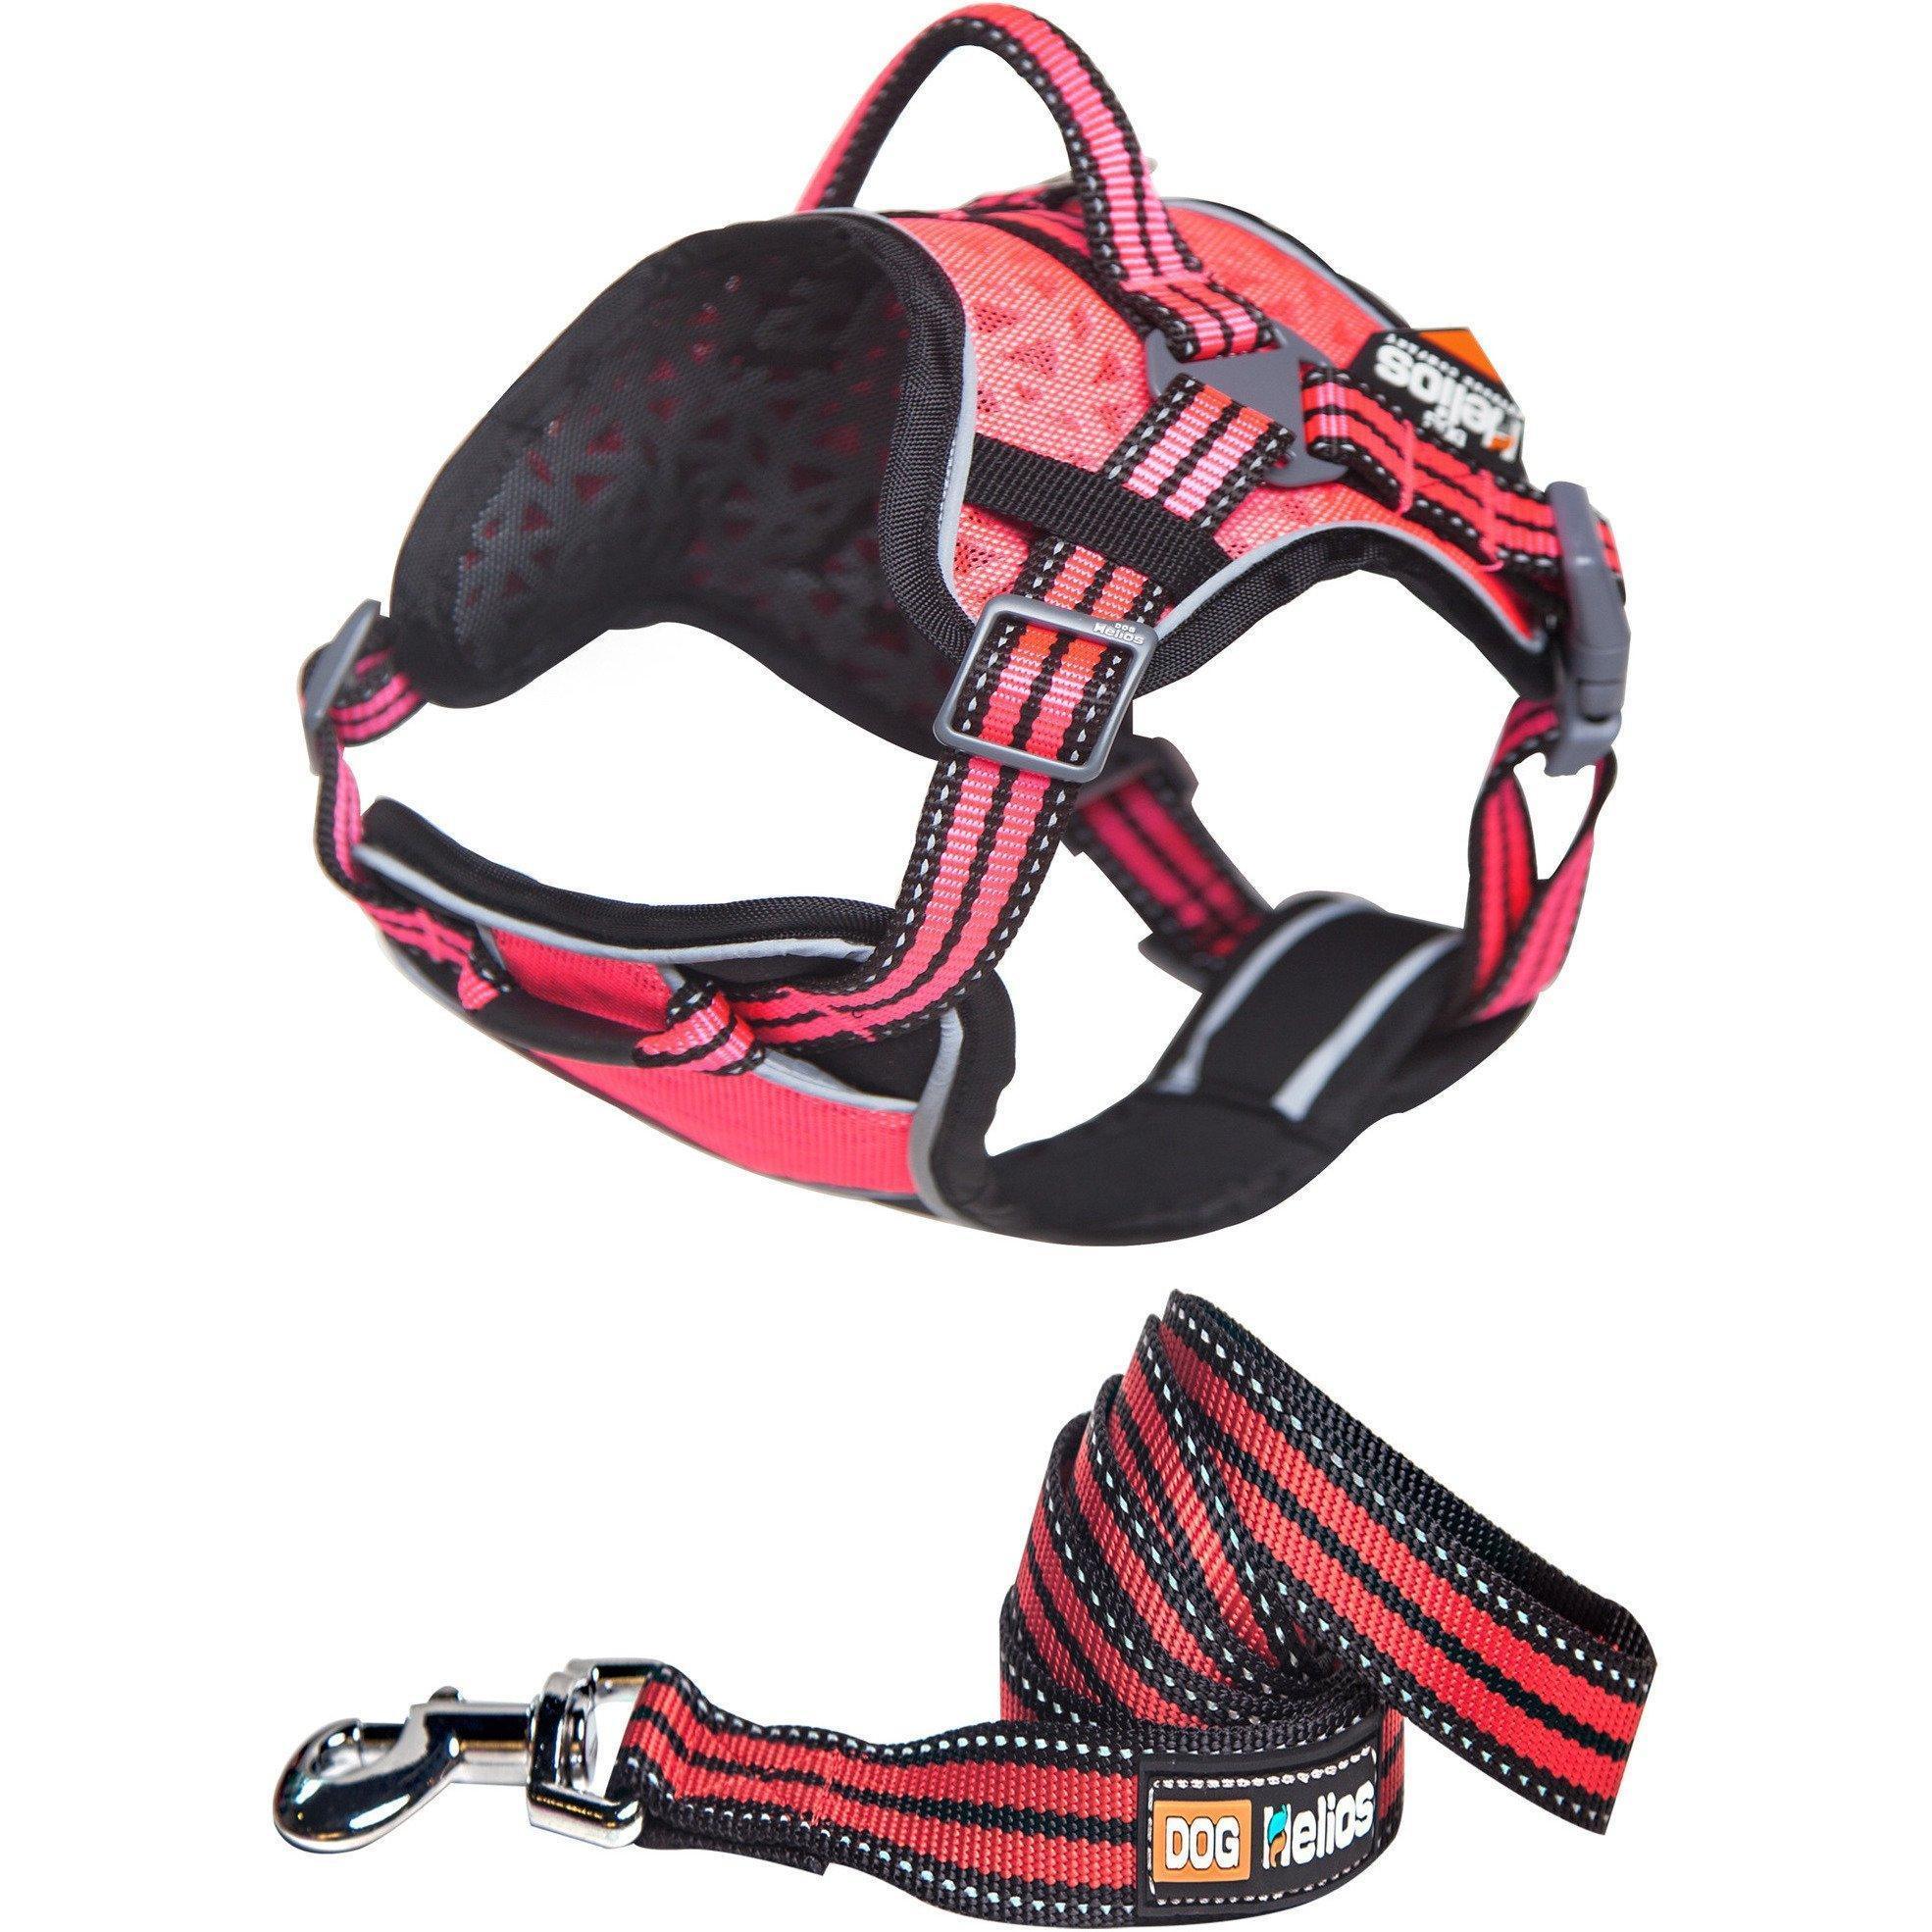 Dog Helios ® 'Journey Wander' Chest Compressive Sporty Adjustable Dog Harness and Leash Small Pink